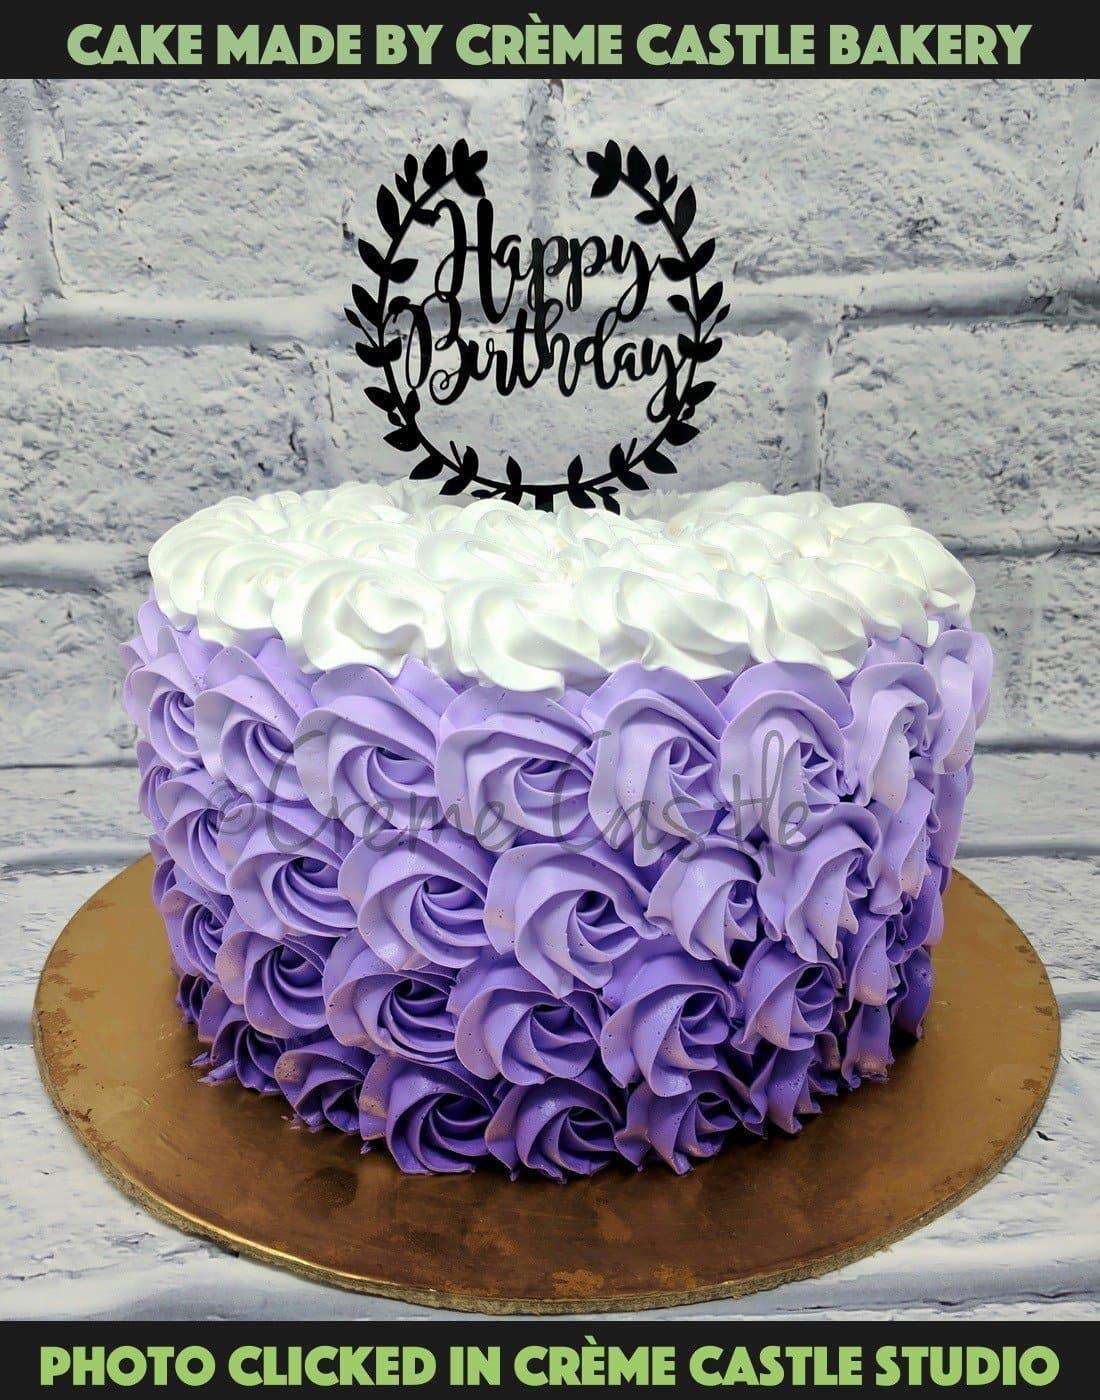 Purple cake with gold drip | Send Birthday Cakes to your loved ones – Kukkr